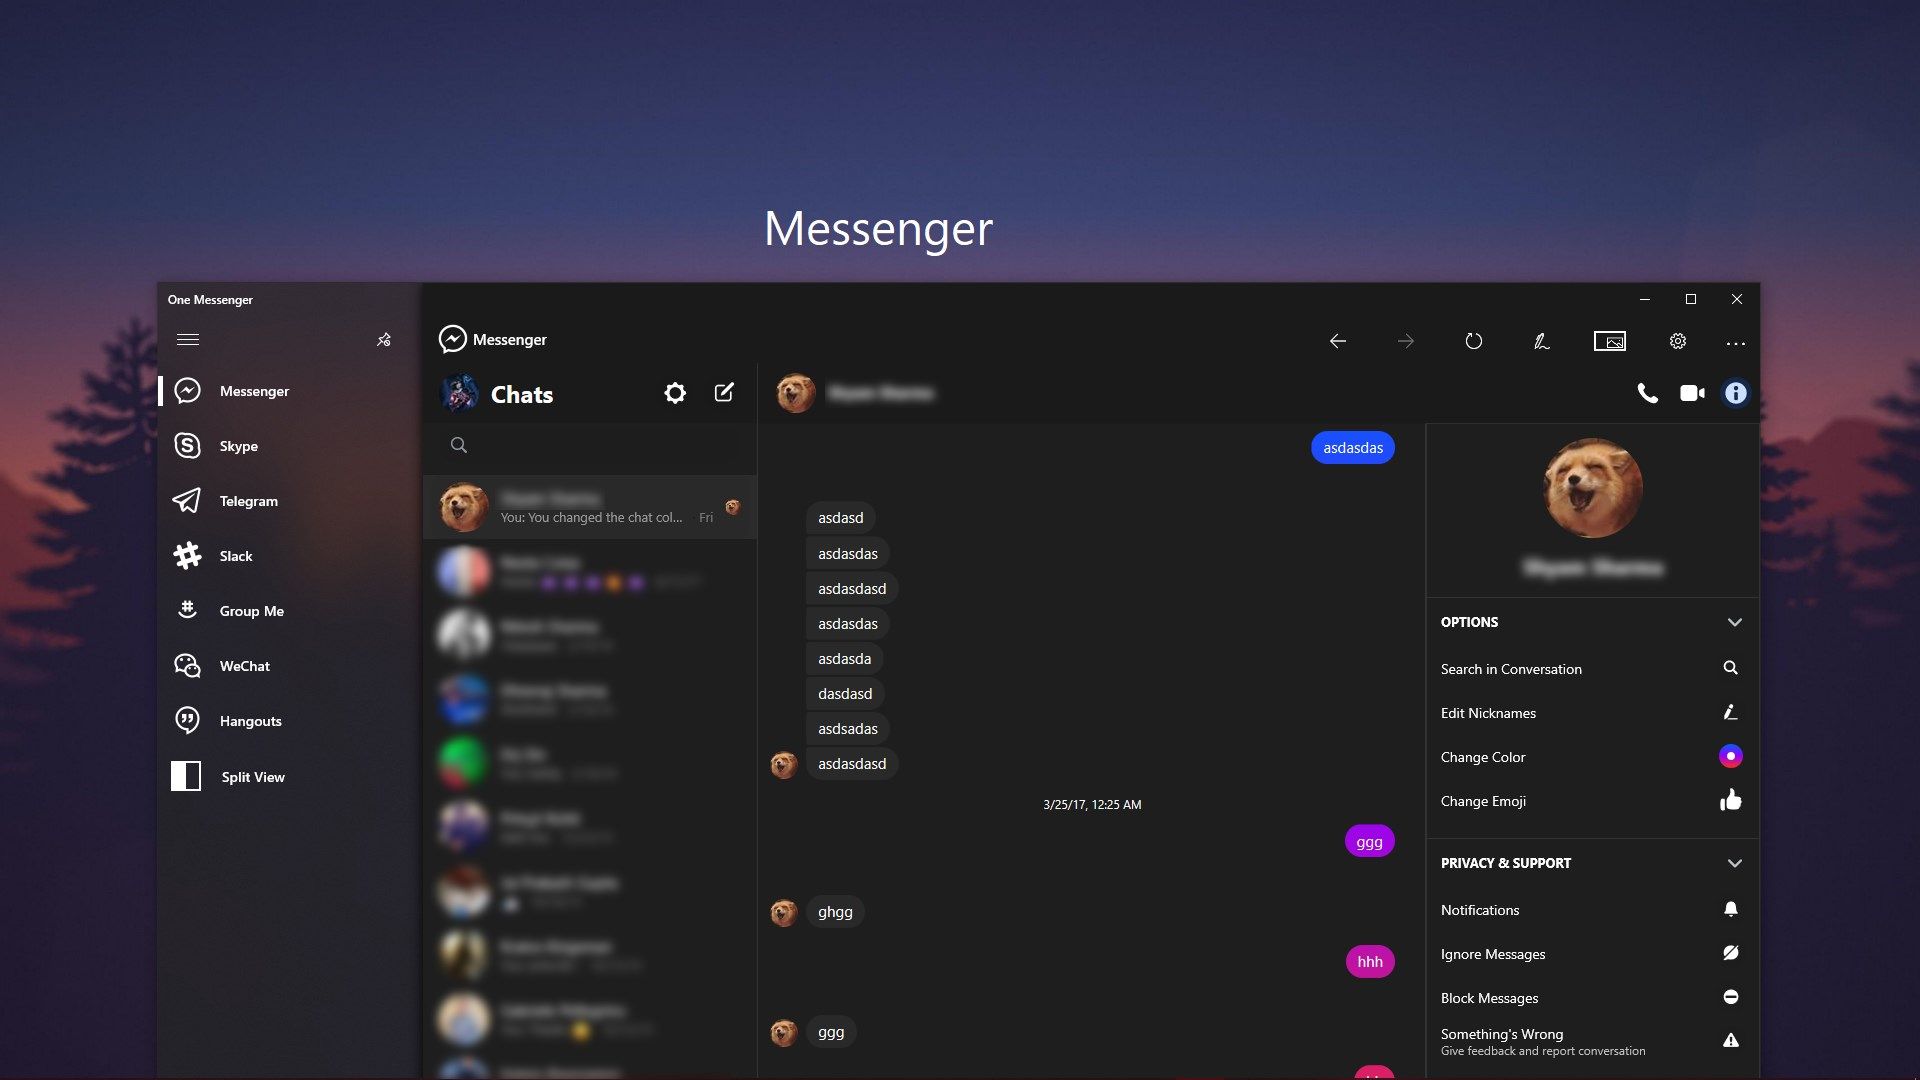 One Messenger - All your messages in one place!